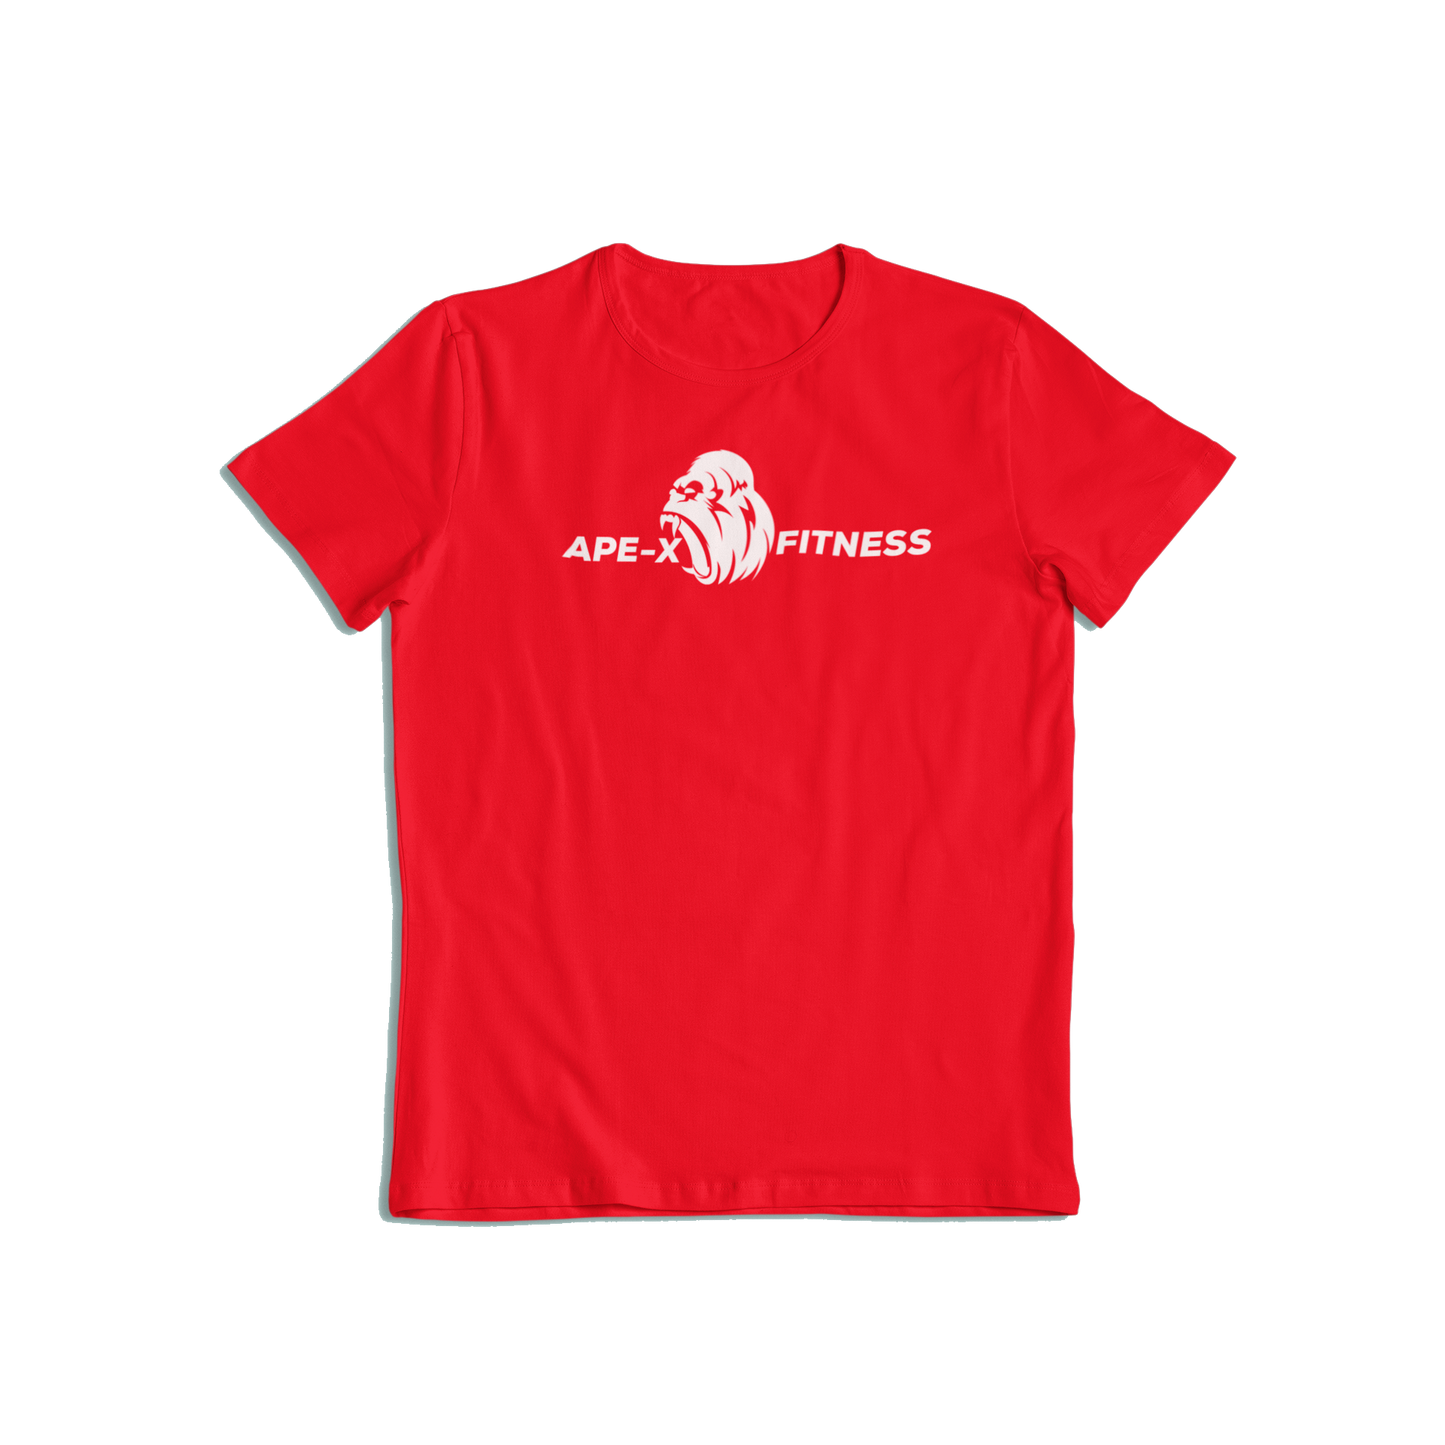 "Ape-X Fitness" ShortSleeve "RED"